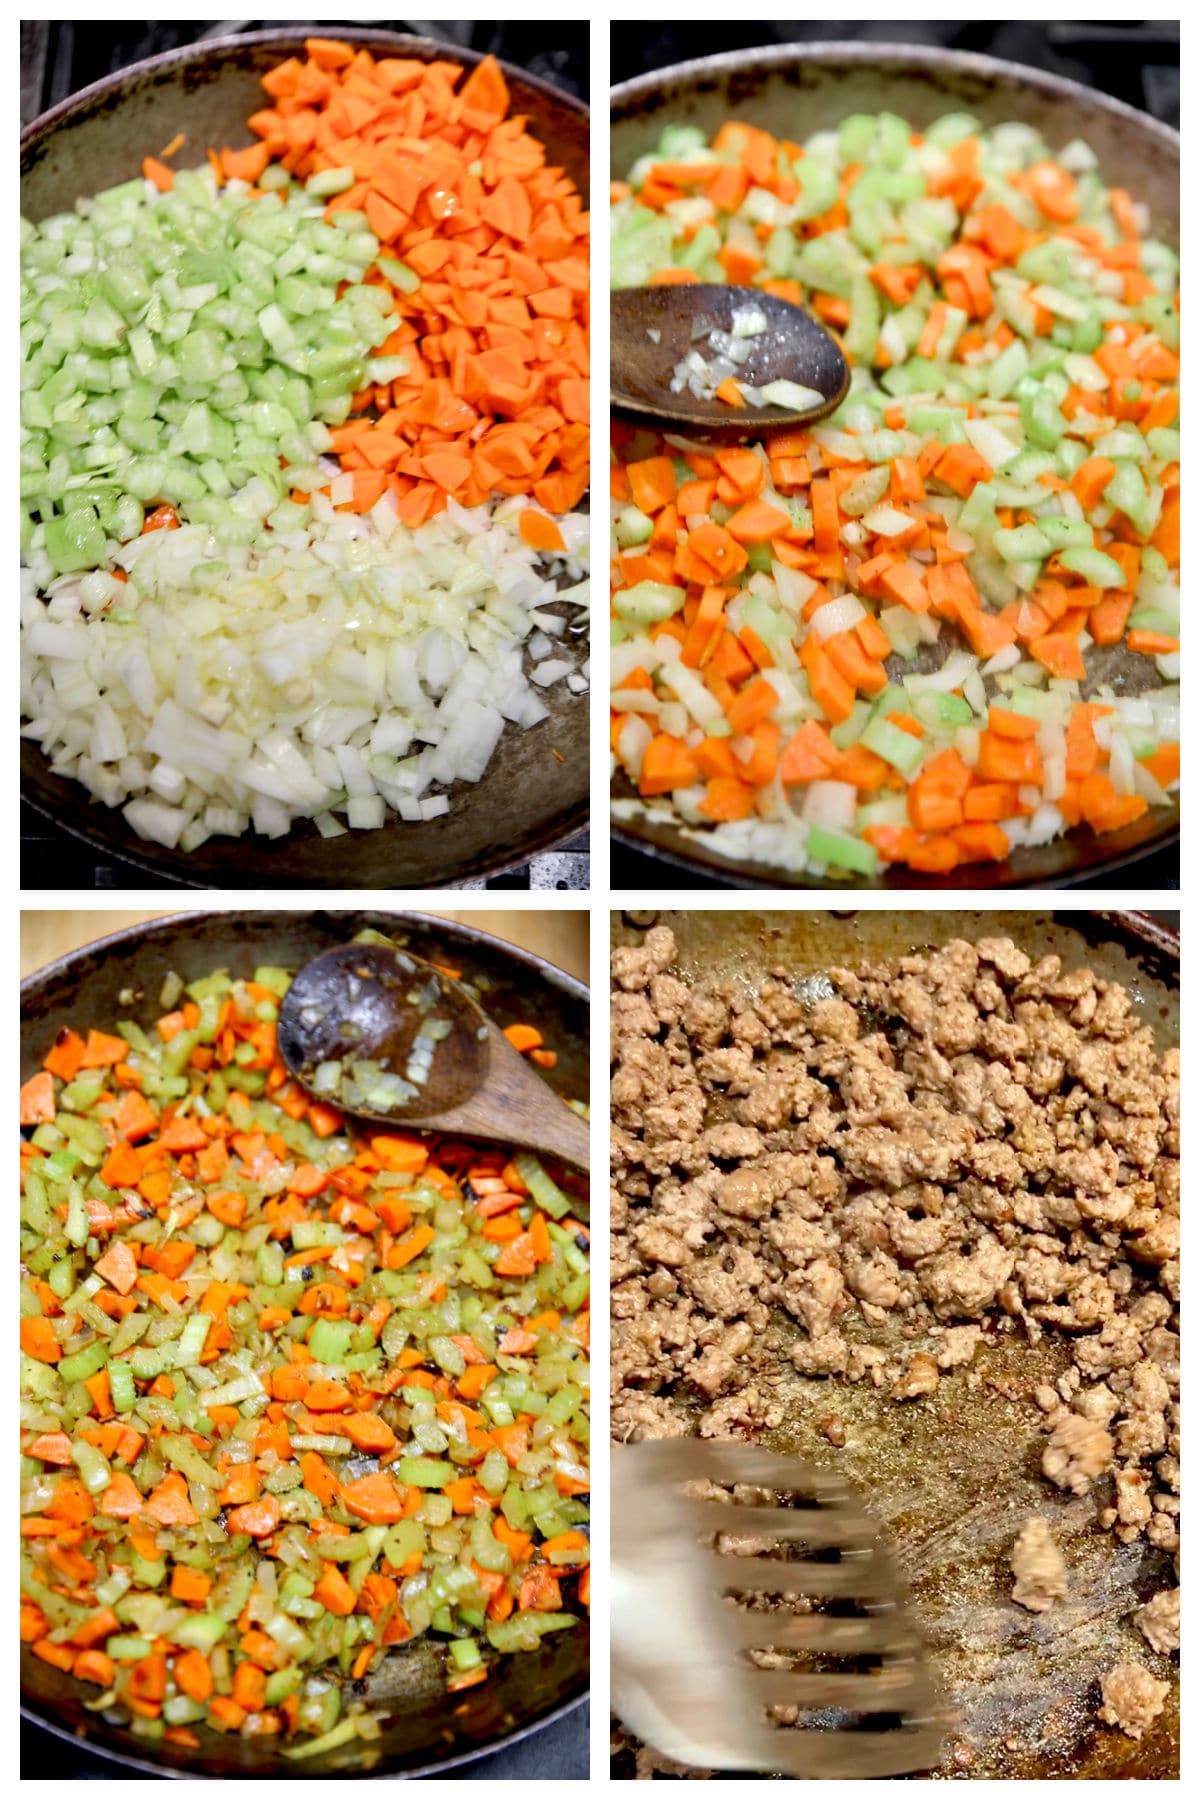 Collage cooking carrots, celery onions. Browning ground beef.